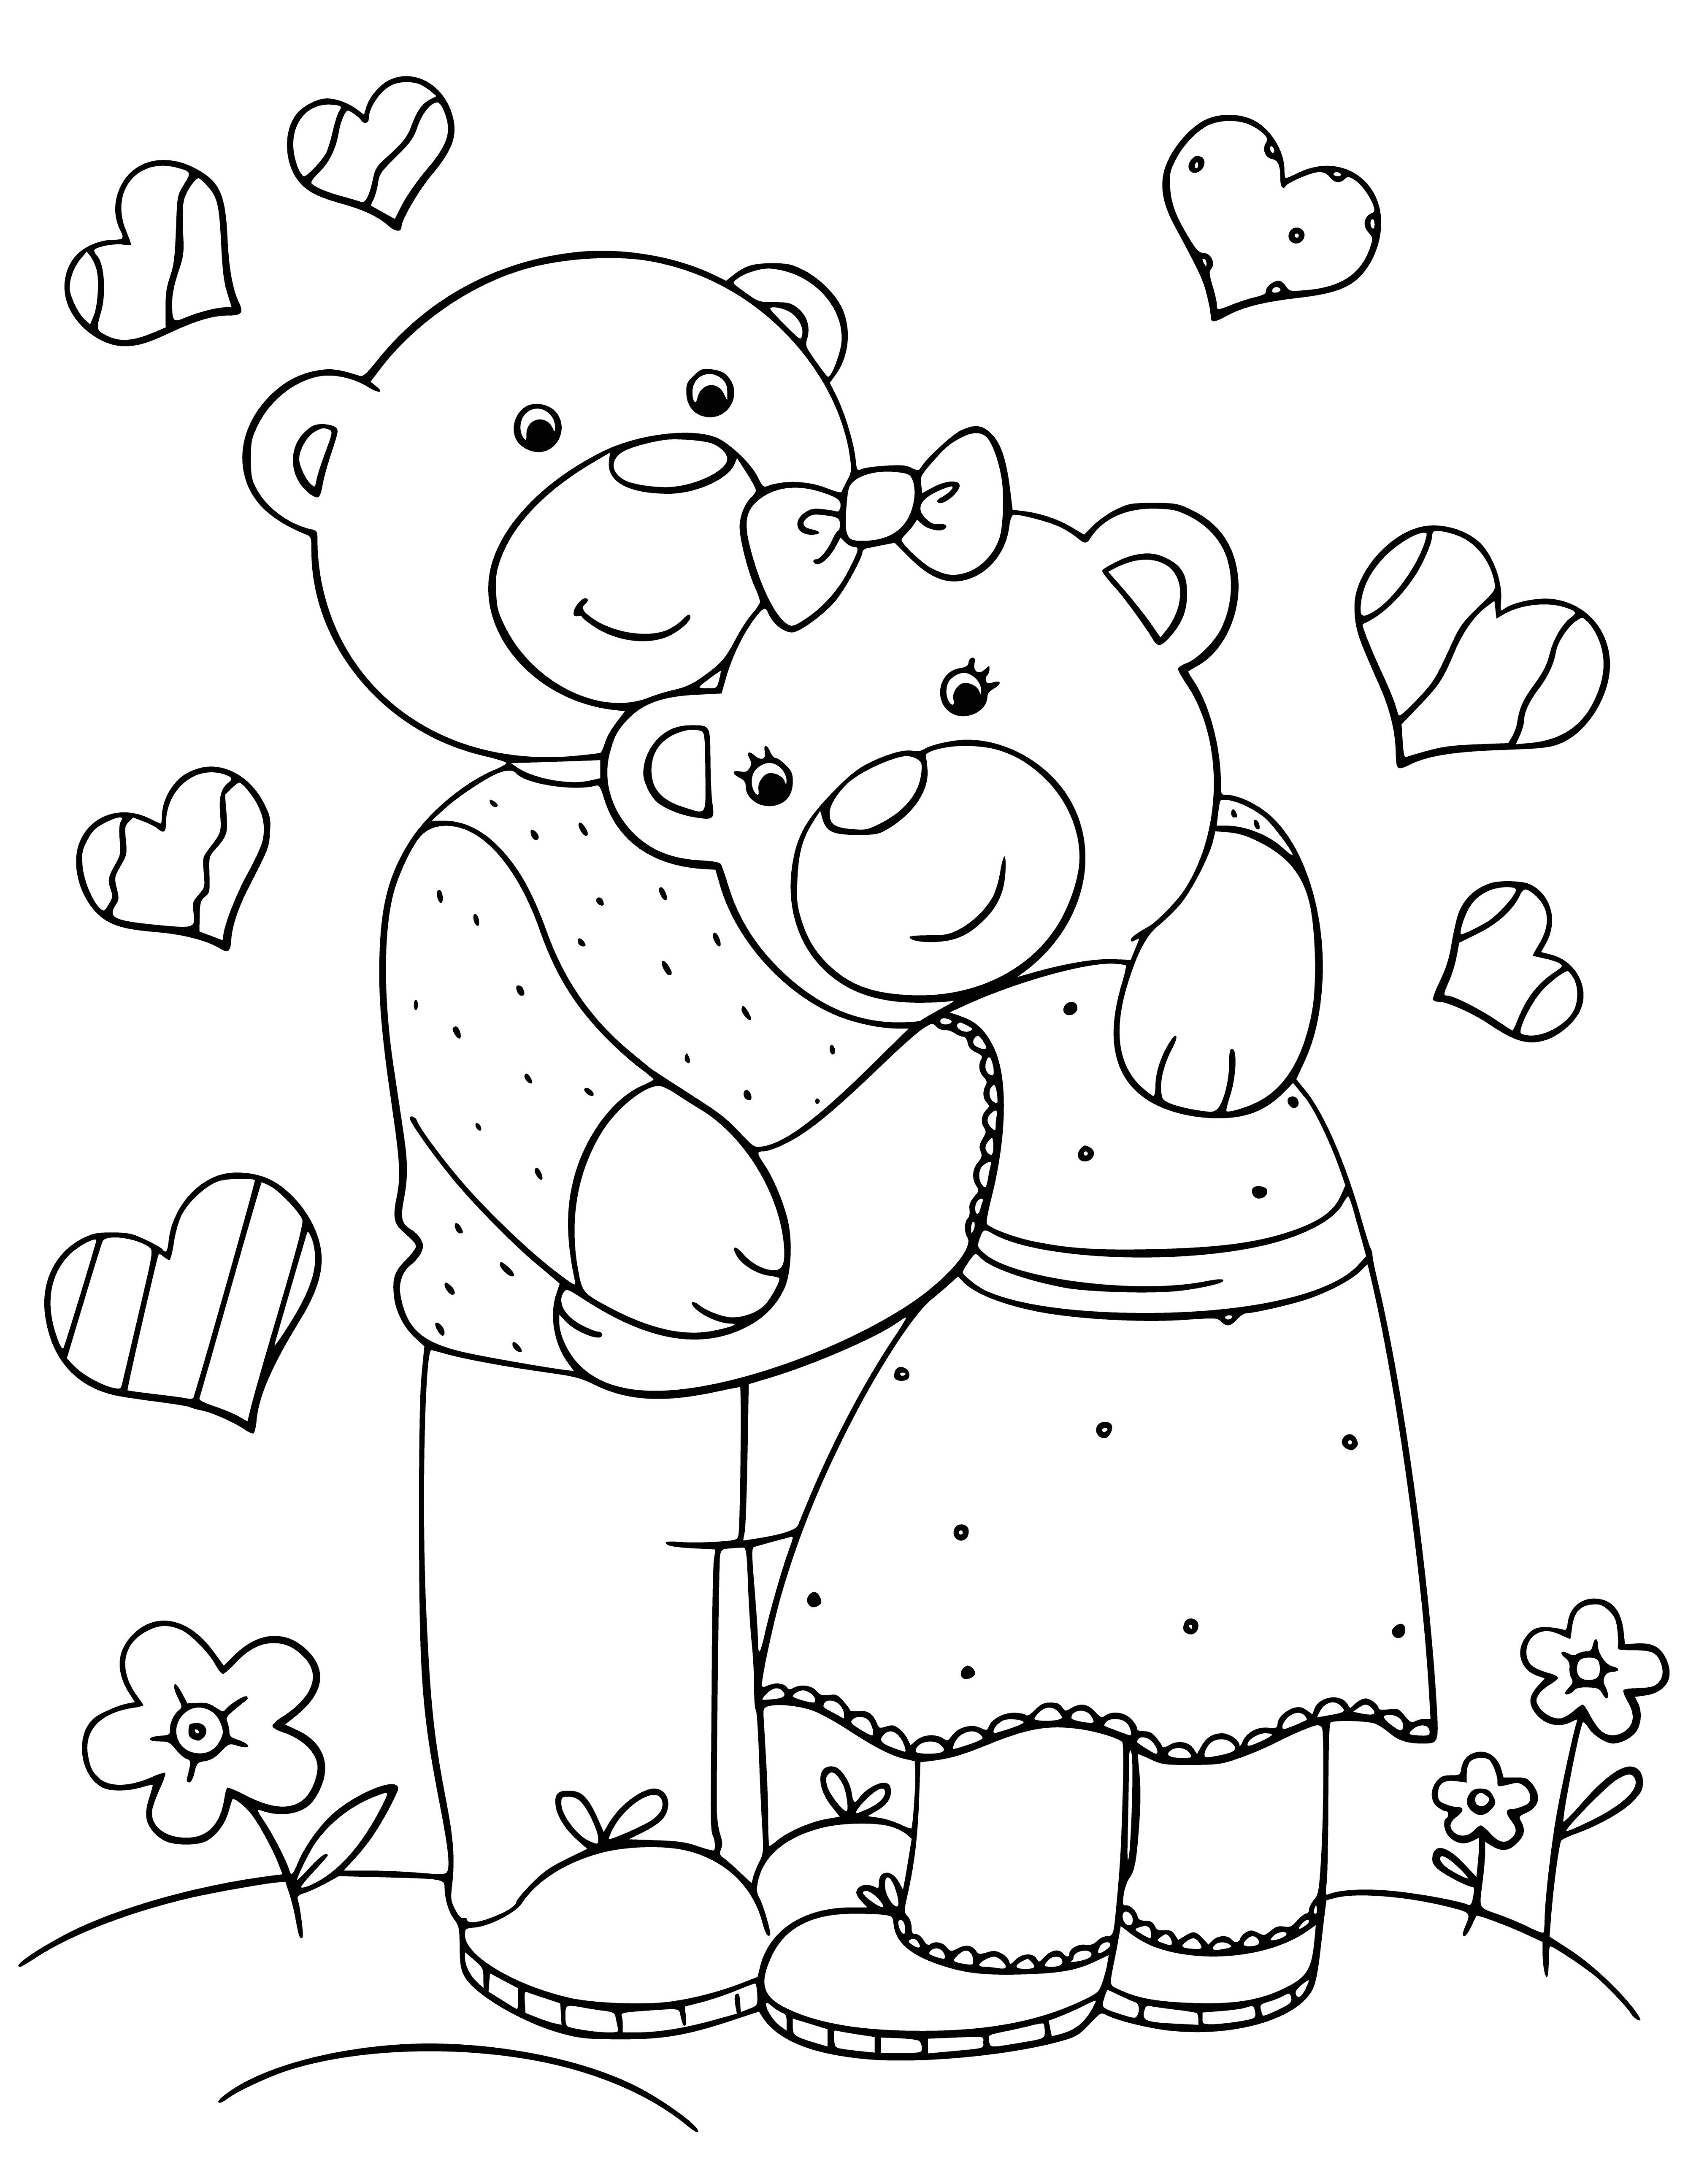 Famille d'ours coloriage